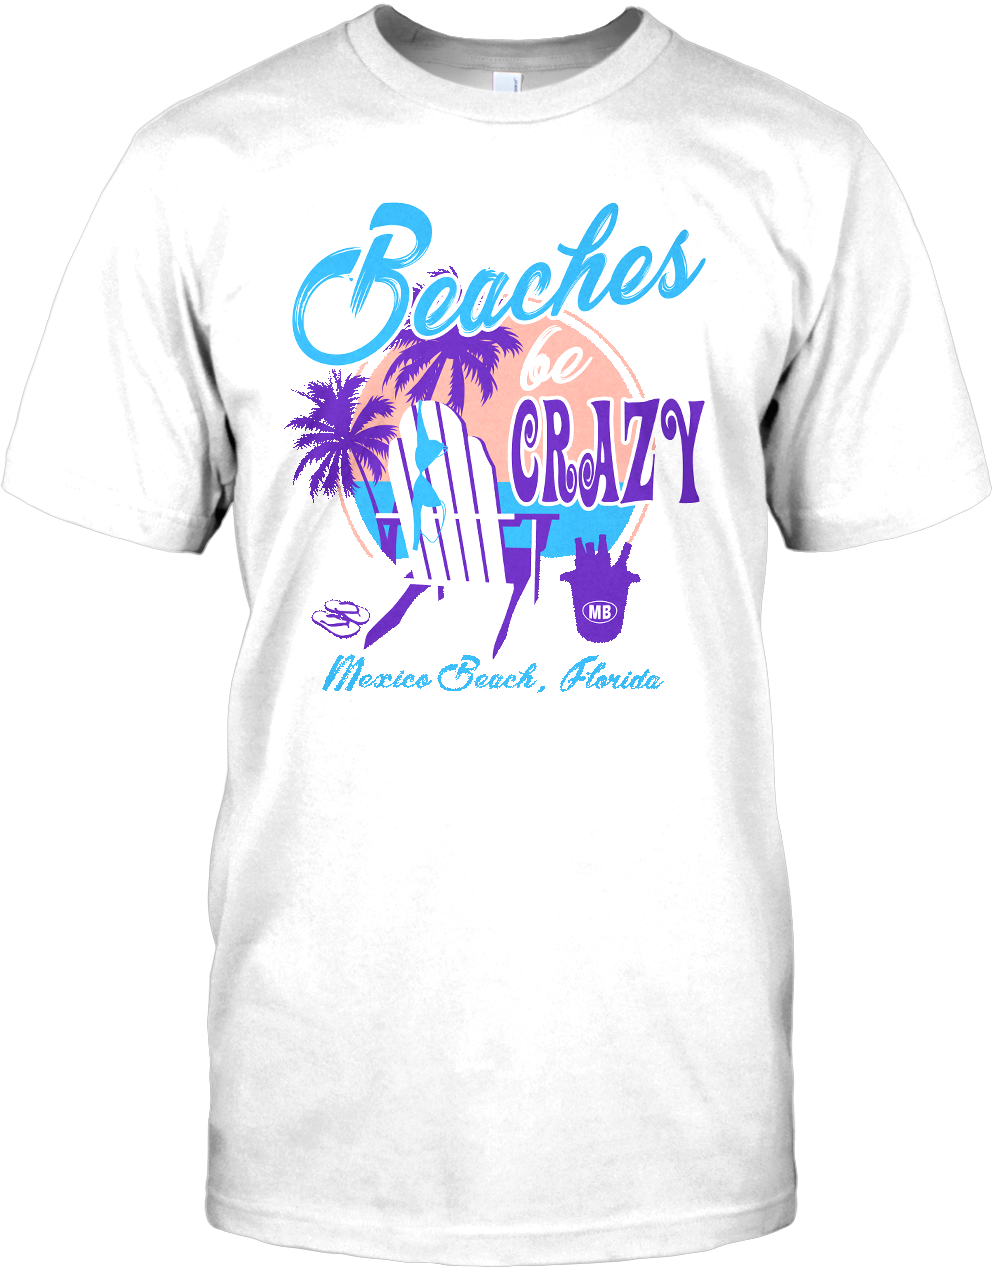 Mens Short Sleeve T-Shirt with Beaches Be Crazy Imprint